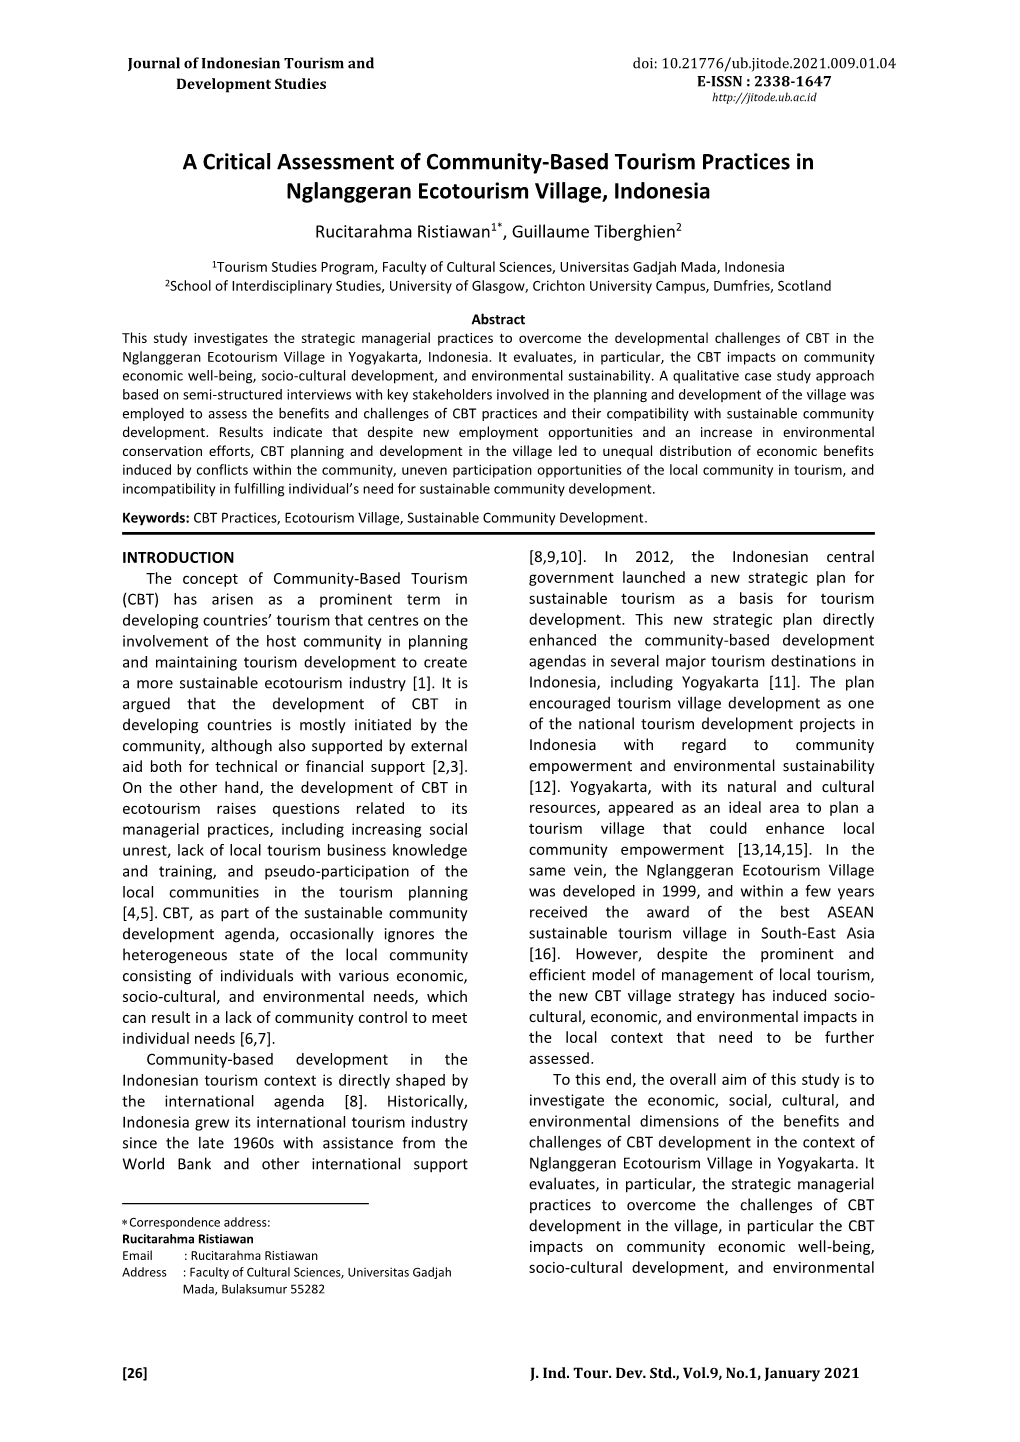 A Critical Assessment of Community-Based Tourism Practices in Nglanggeran Ecotourism Village, Indonesia